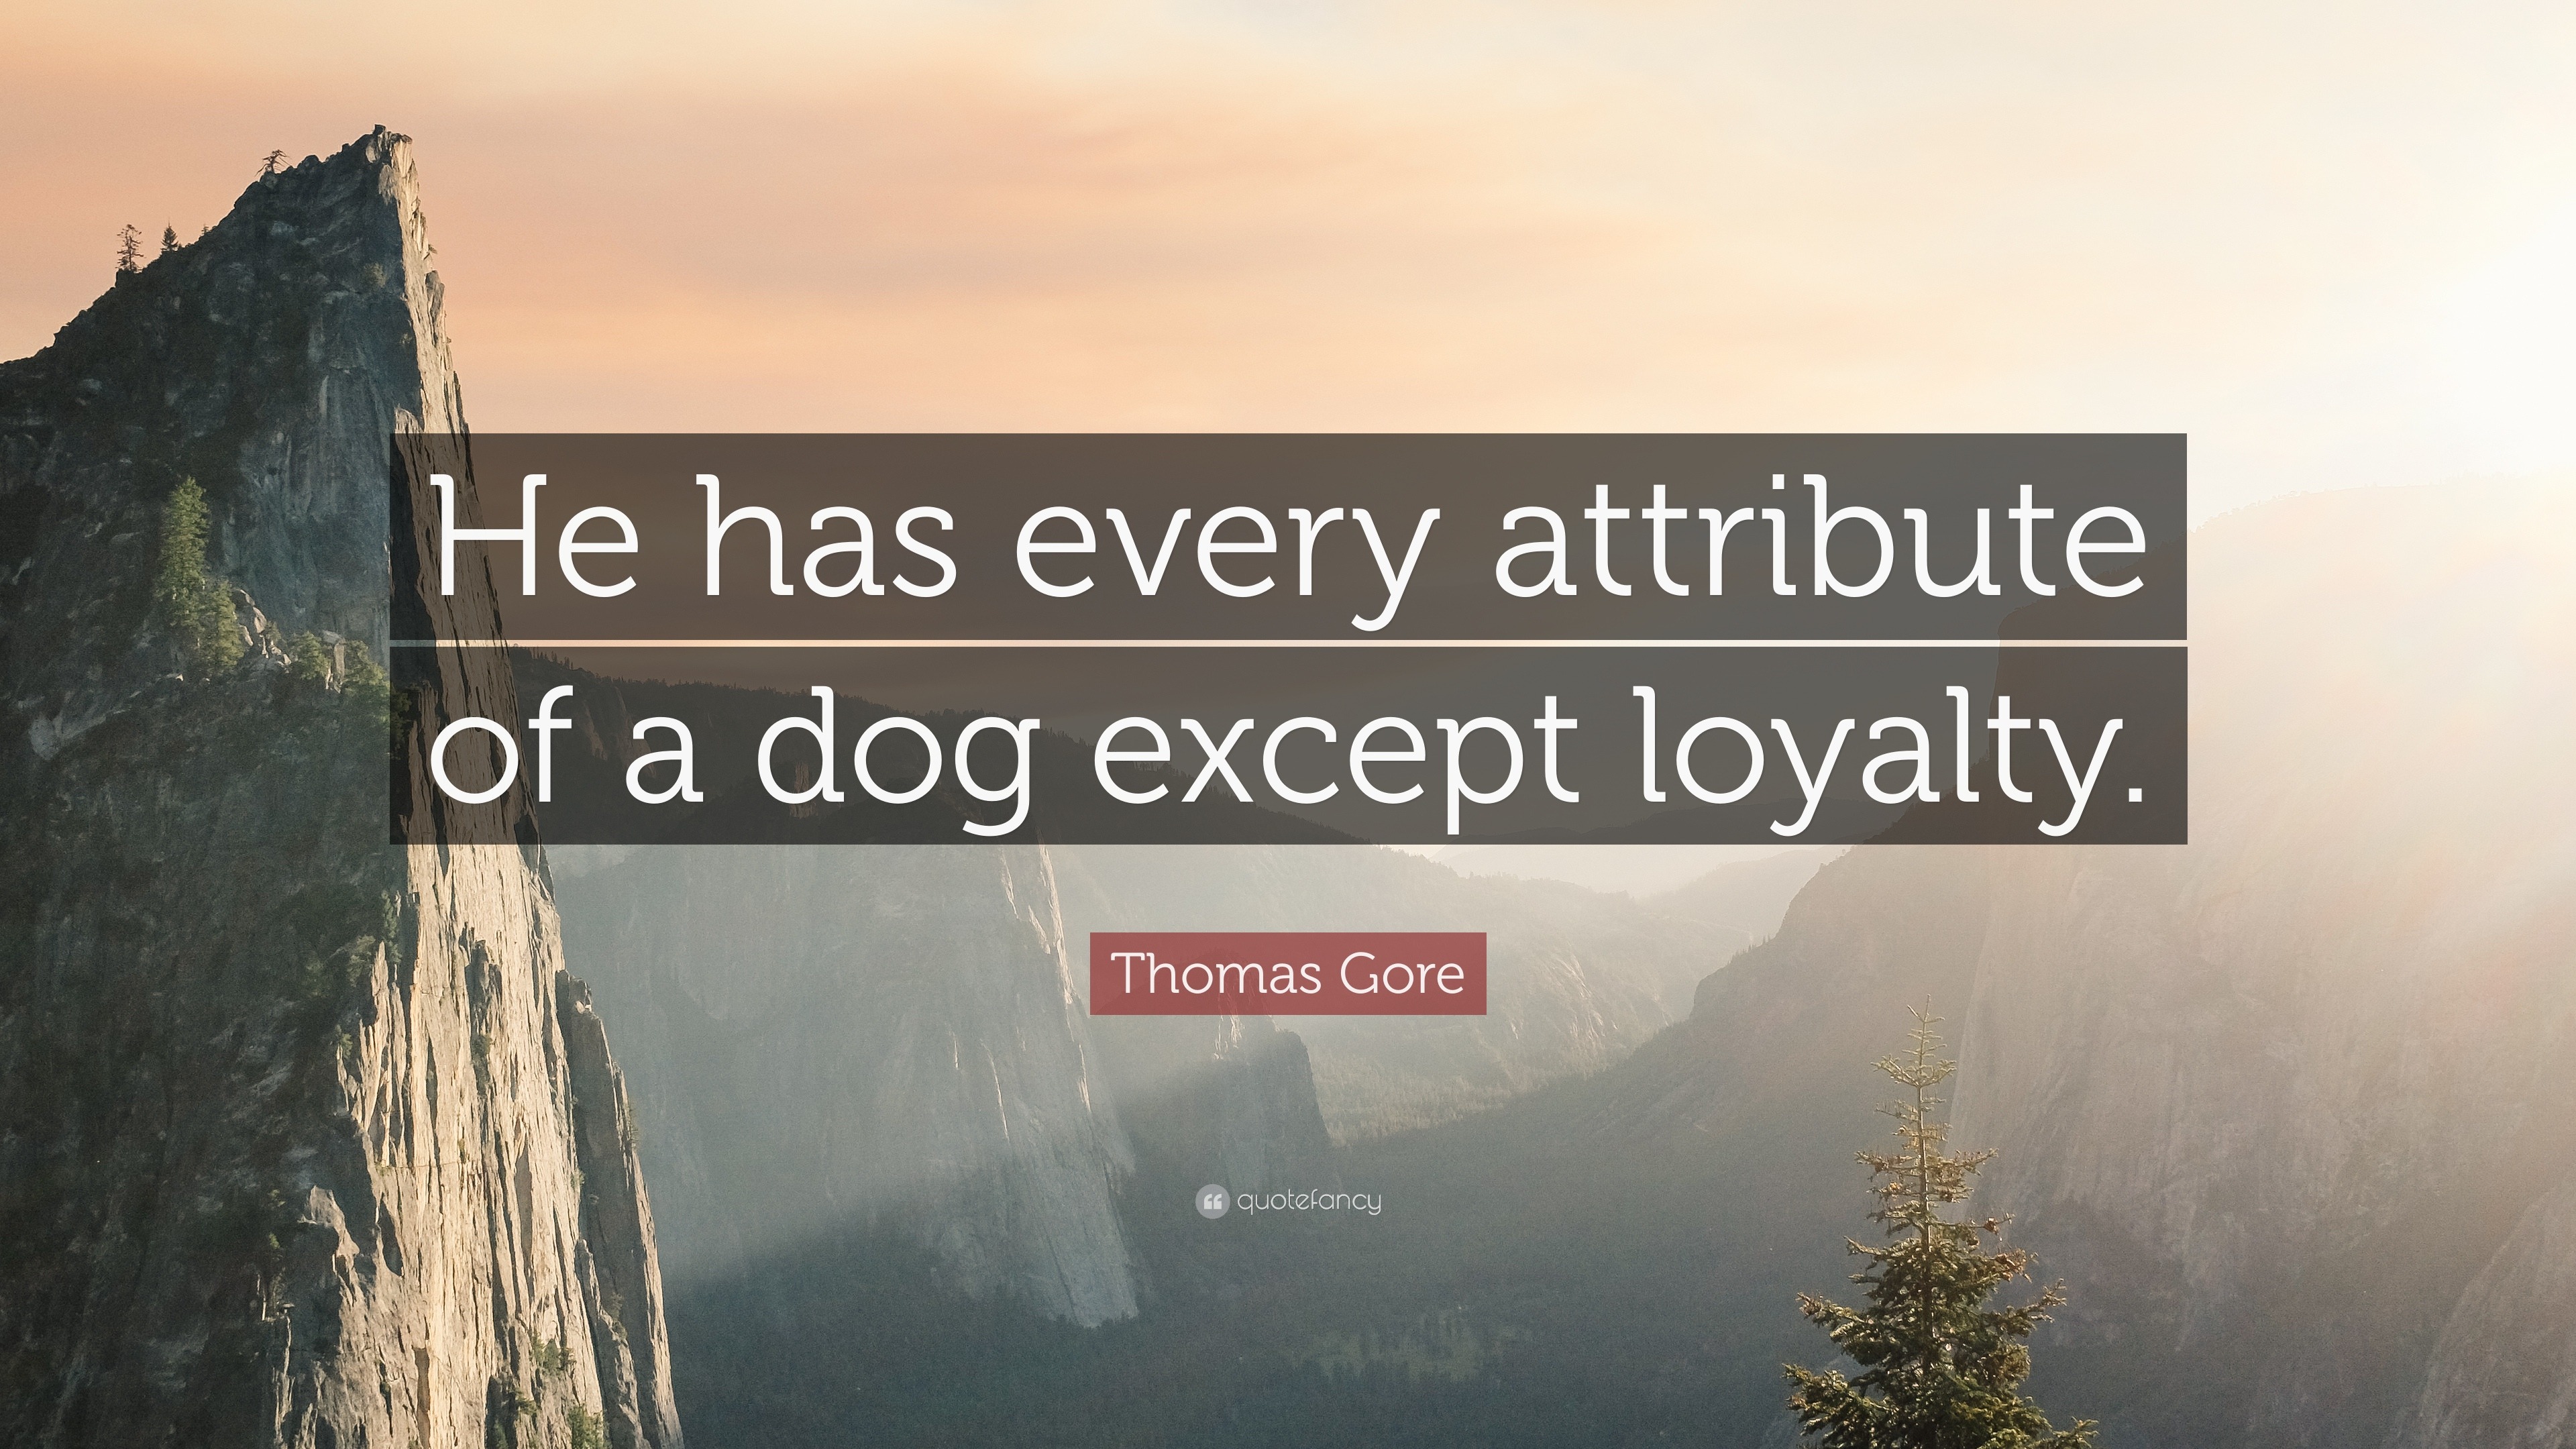 If you want loyalty - buy a dog